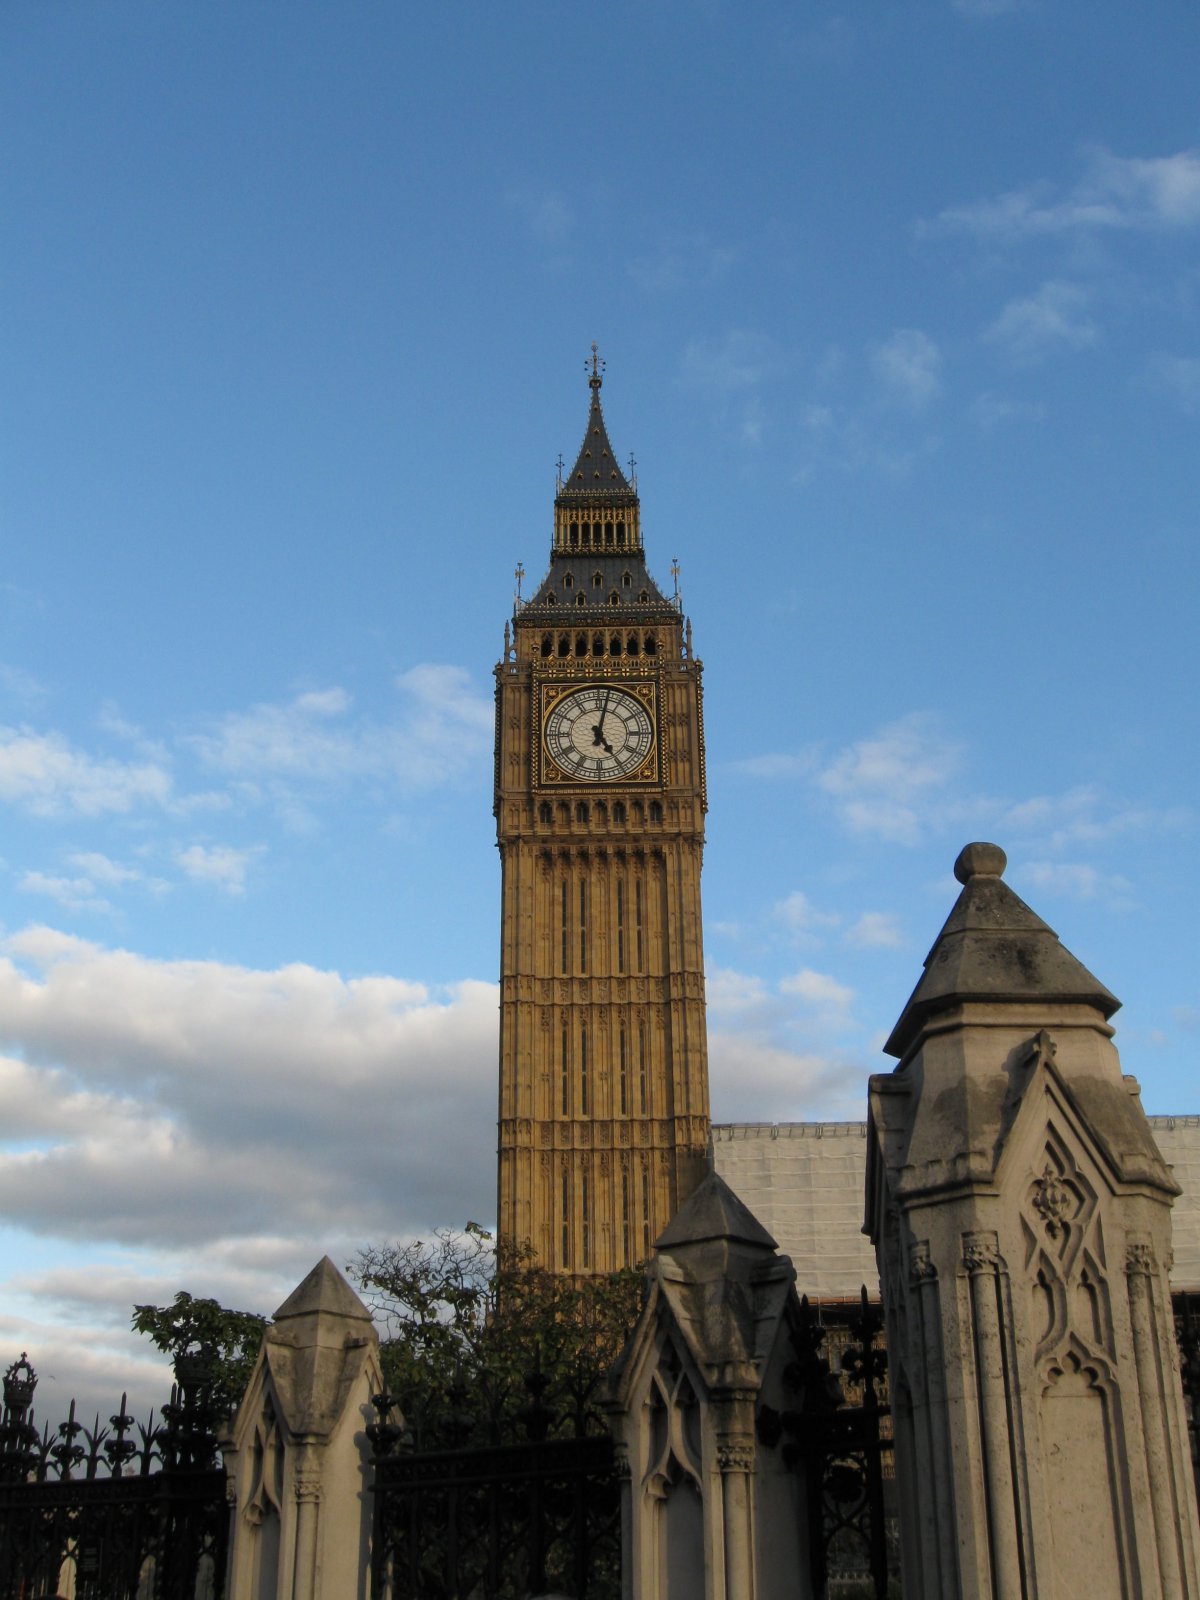 Pictures of Big Ben in London, England